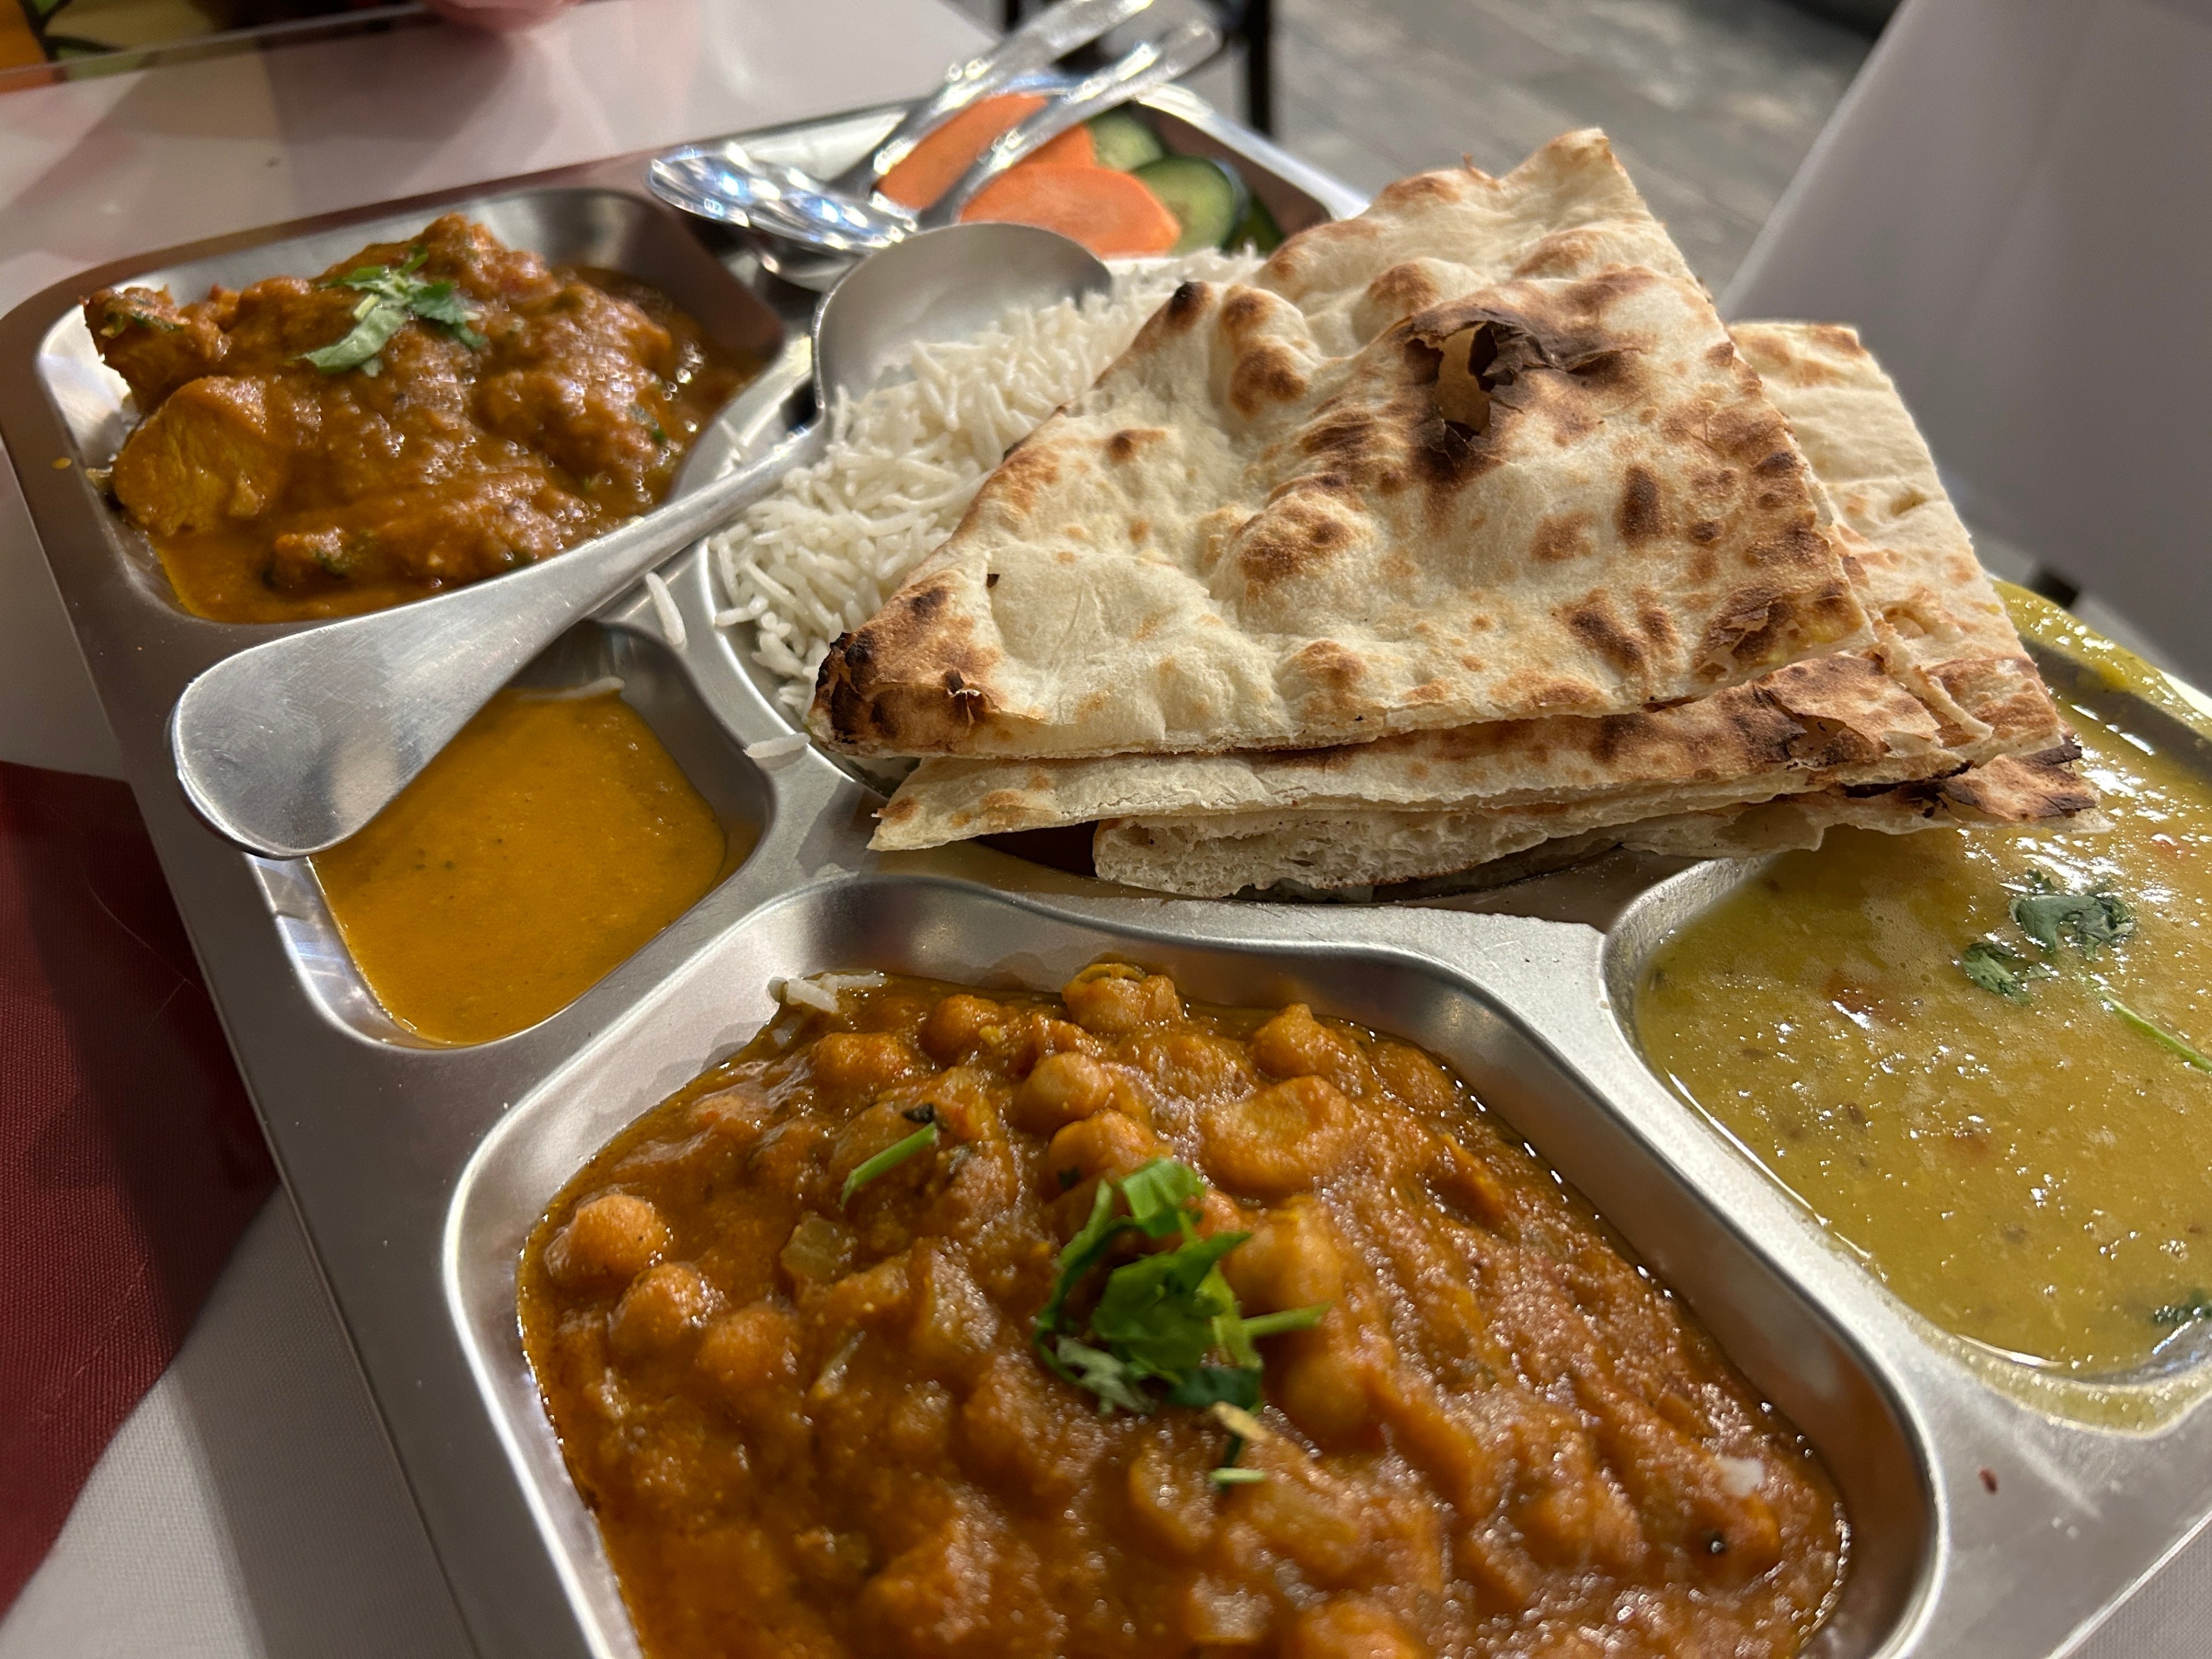 a plate of Nepalese food including naan and curry